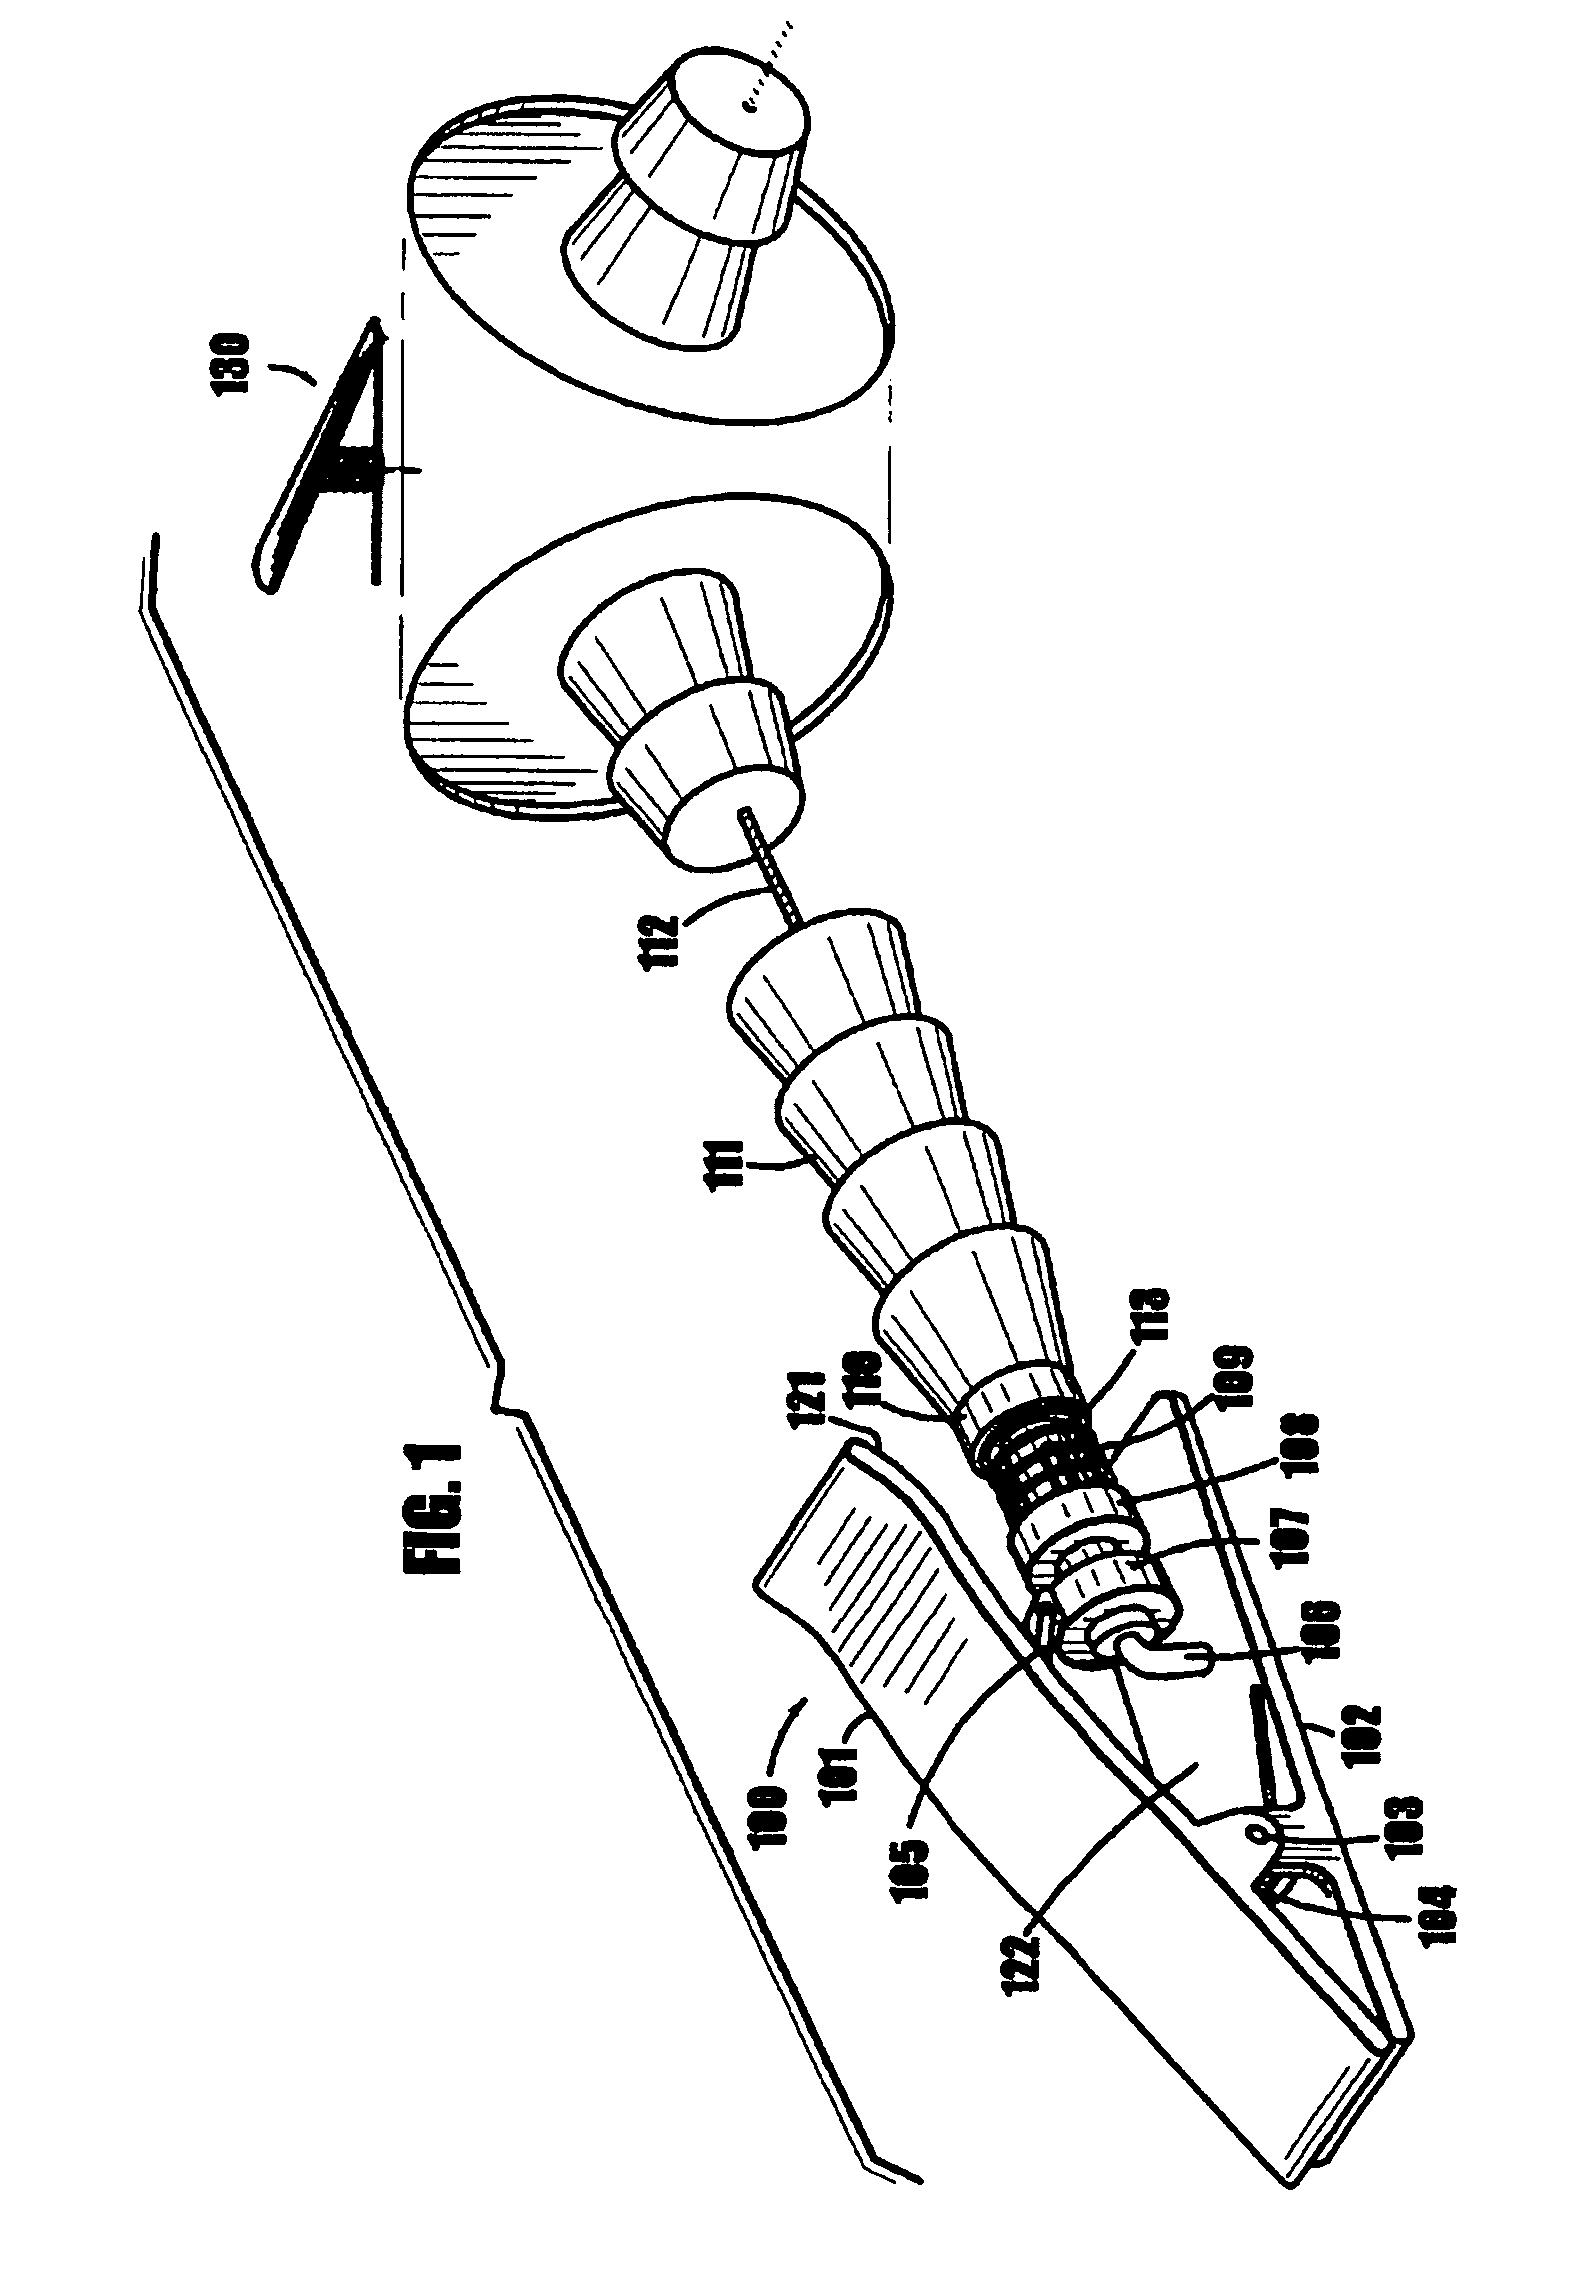 Clamping device with flexible arm